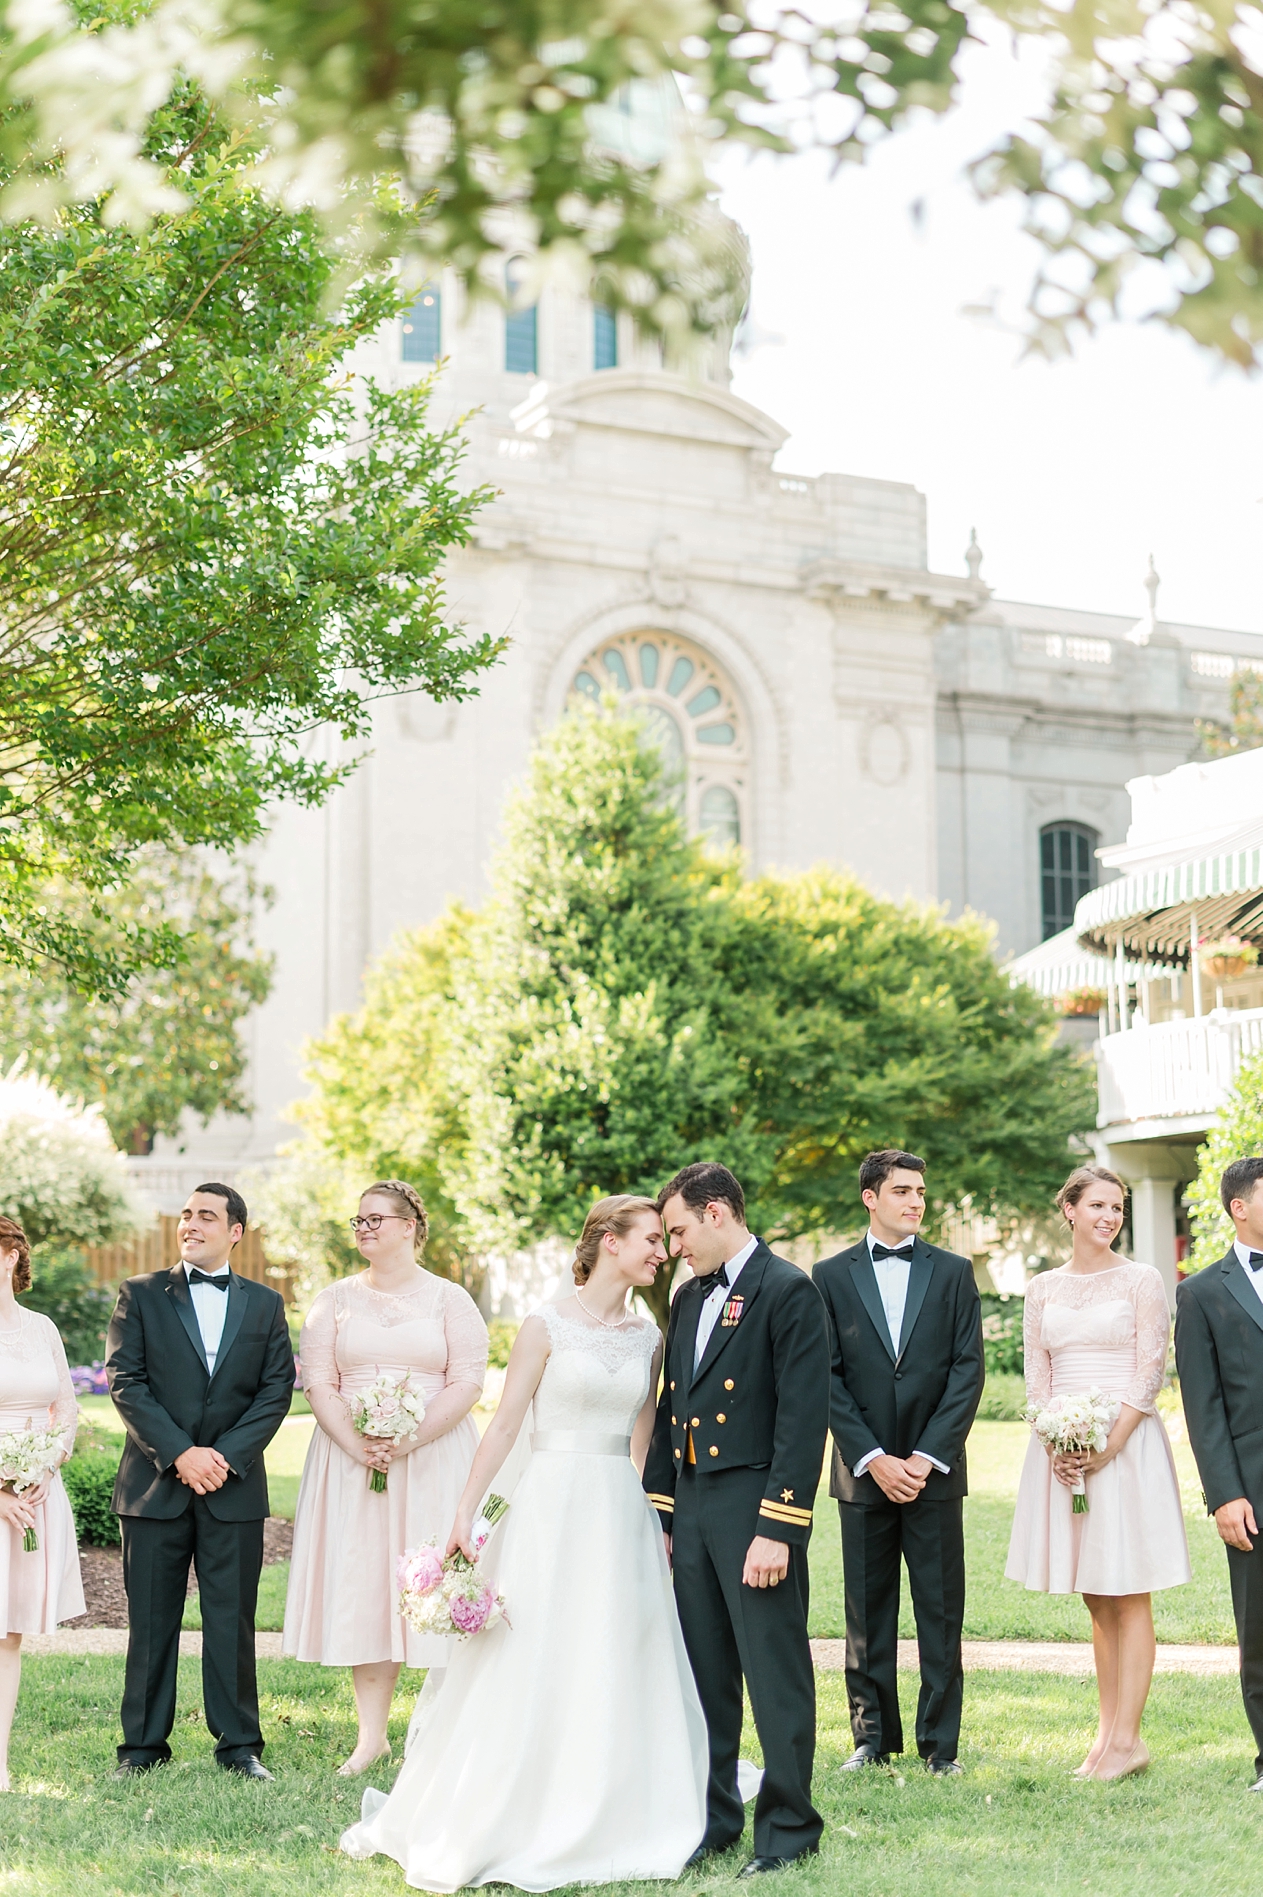 A Classic + Romantic, Jackie O' inspired wedding day at the Naval Academy Chapel | Annapolis, Maryland Fine Art Wedding Photographer | Lauren R Swann